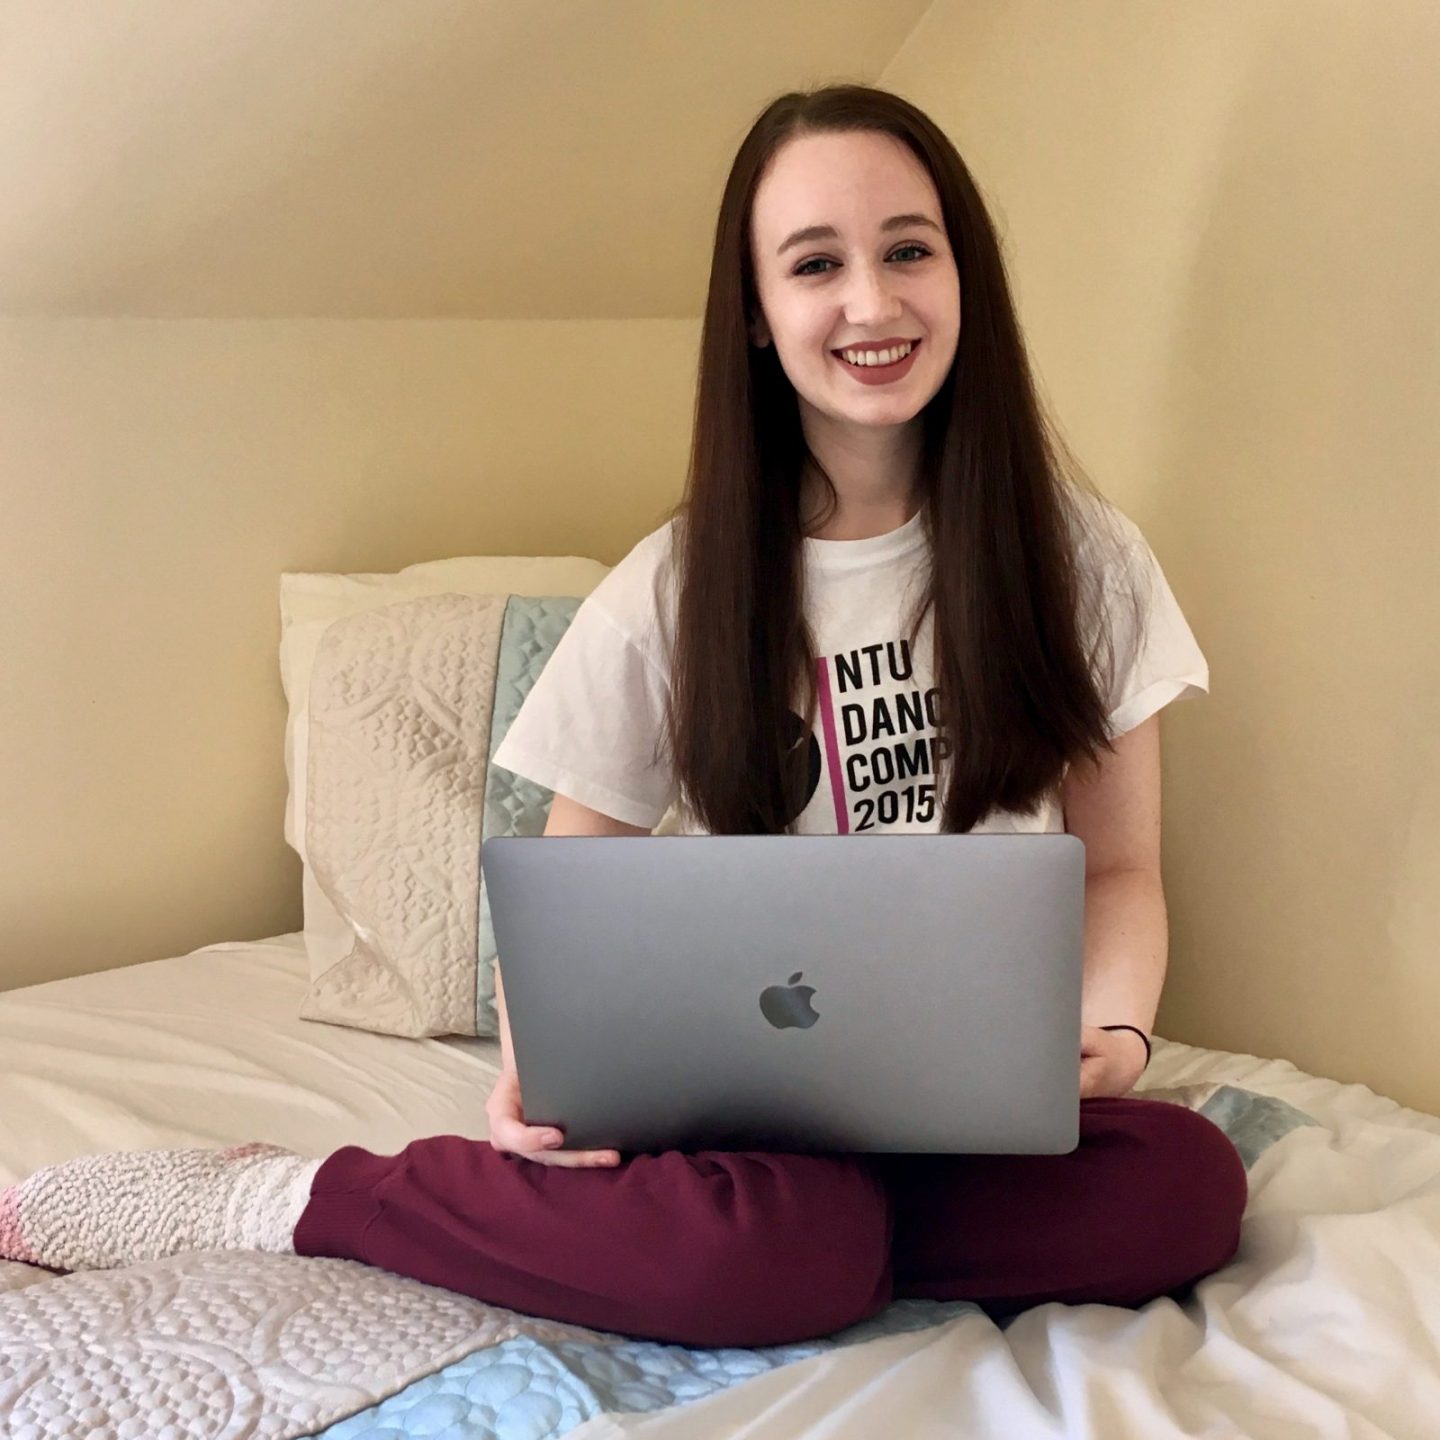 pippa sat on bed, legs crossed with laptop open and resting on knees. Pippa is wearing comfy clothes and has long brown hair down, smiling at camera